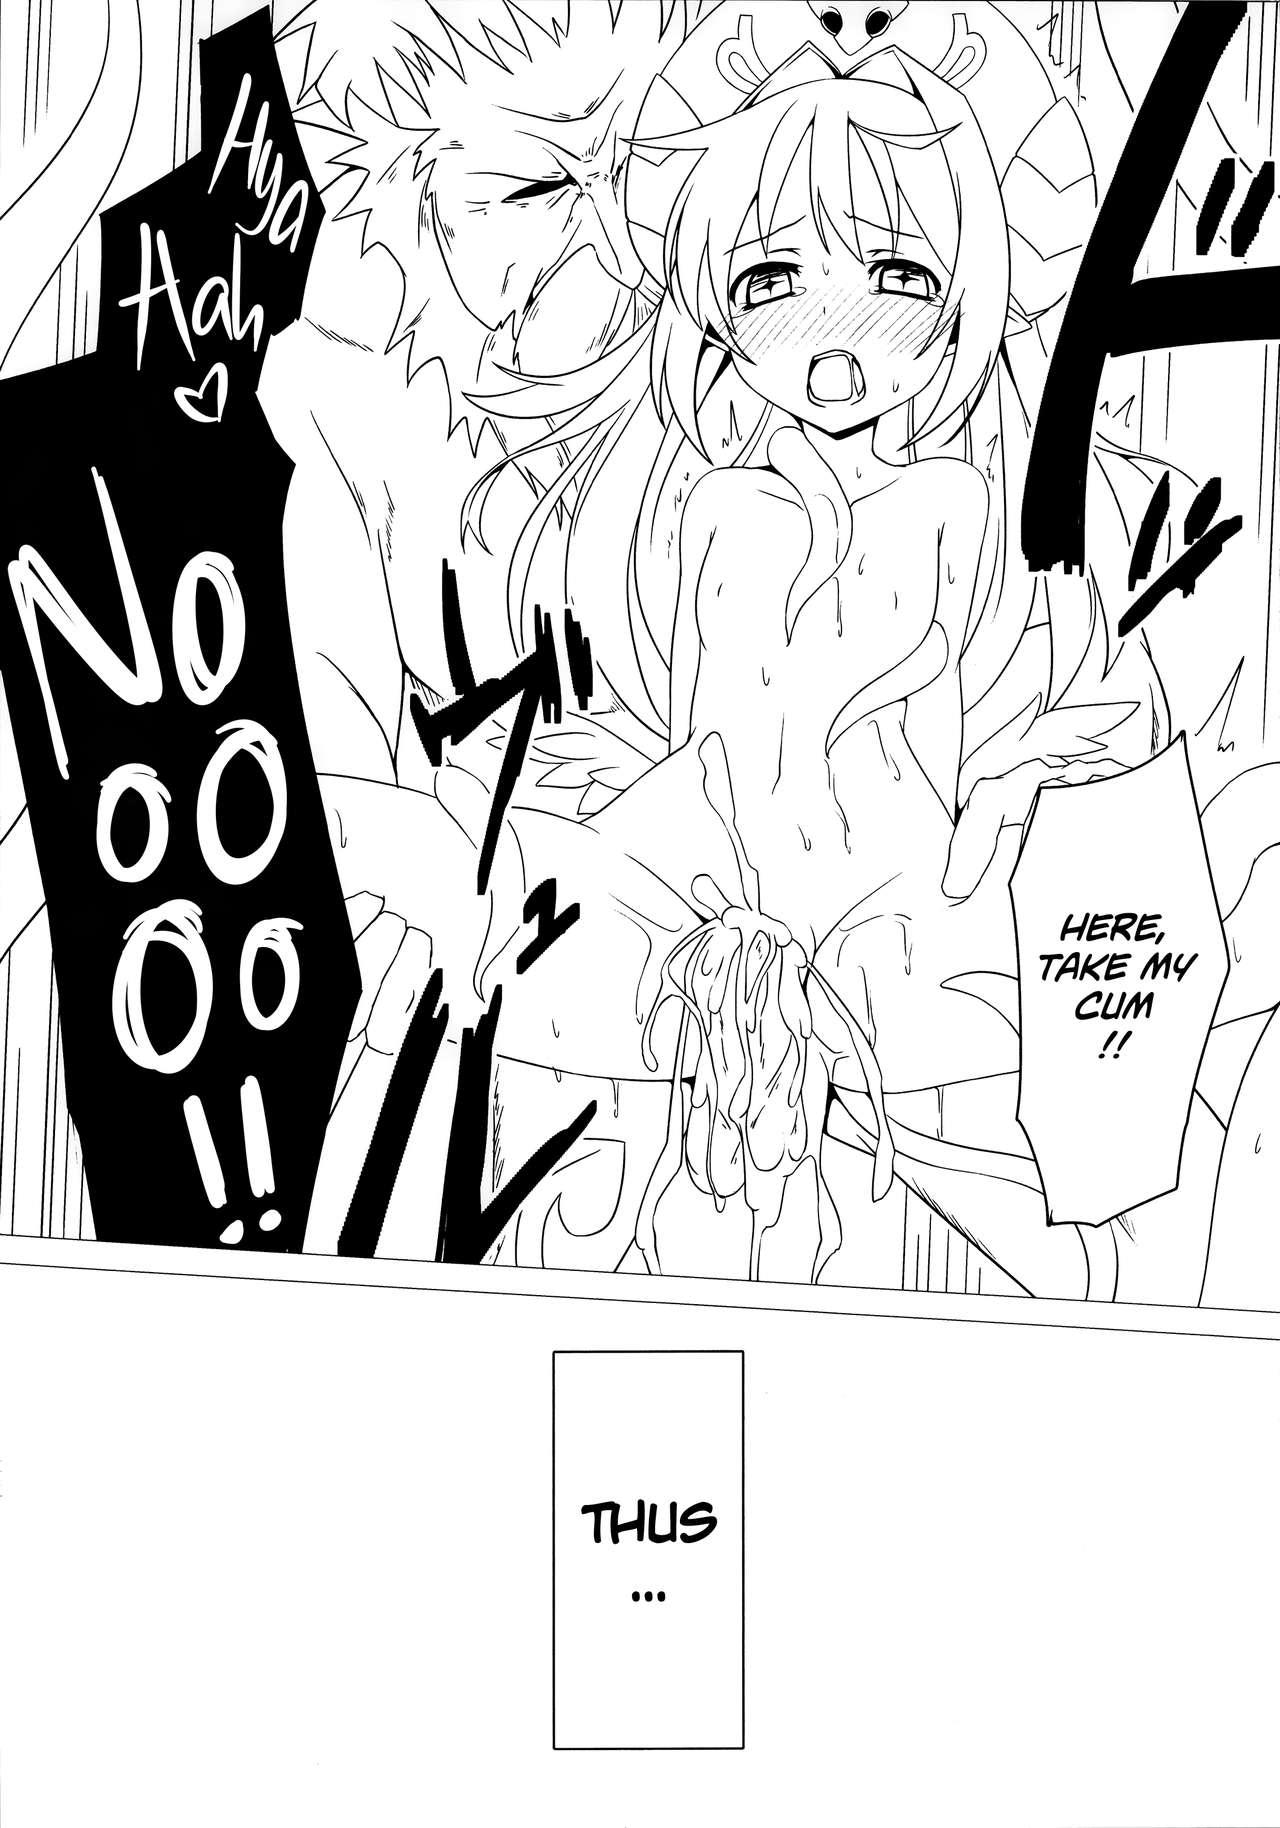 Old And Young Summoning Accident - Shinrabansho Girls - Page 7